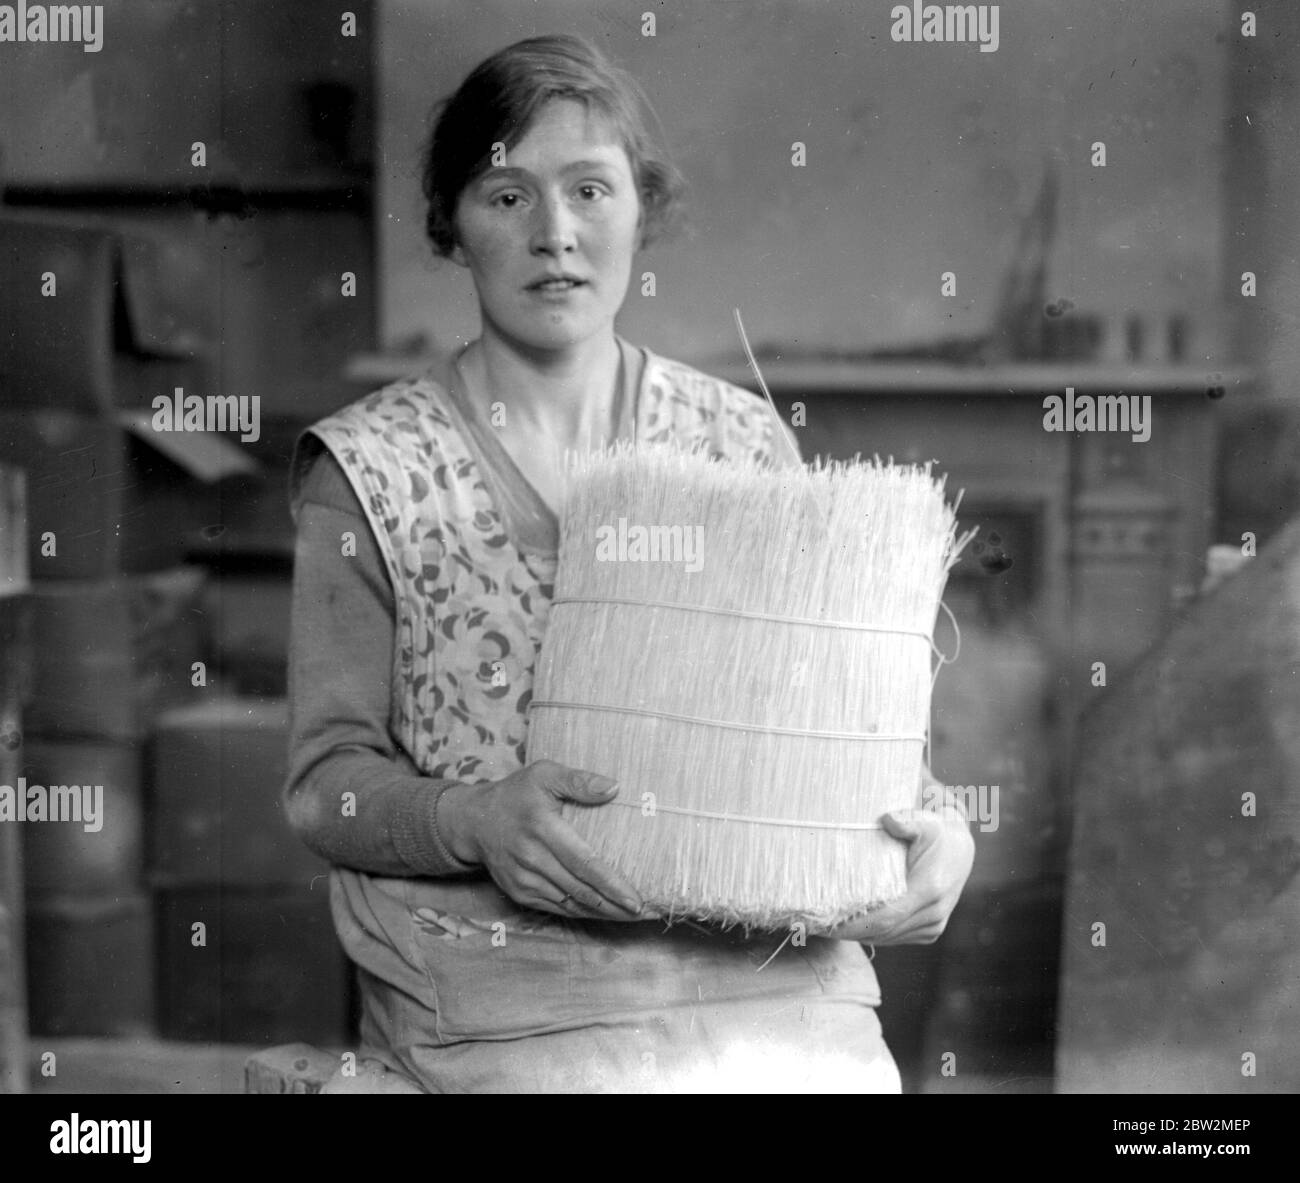 Whalebone cutting - A Leyton industry. The finished article, which may comb your hair or sweep the room. 1923 Stock Photo